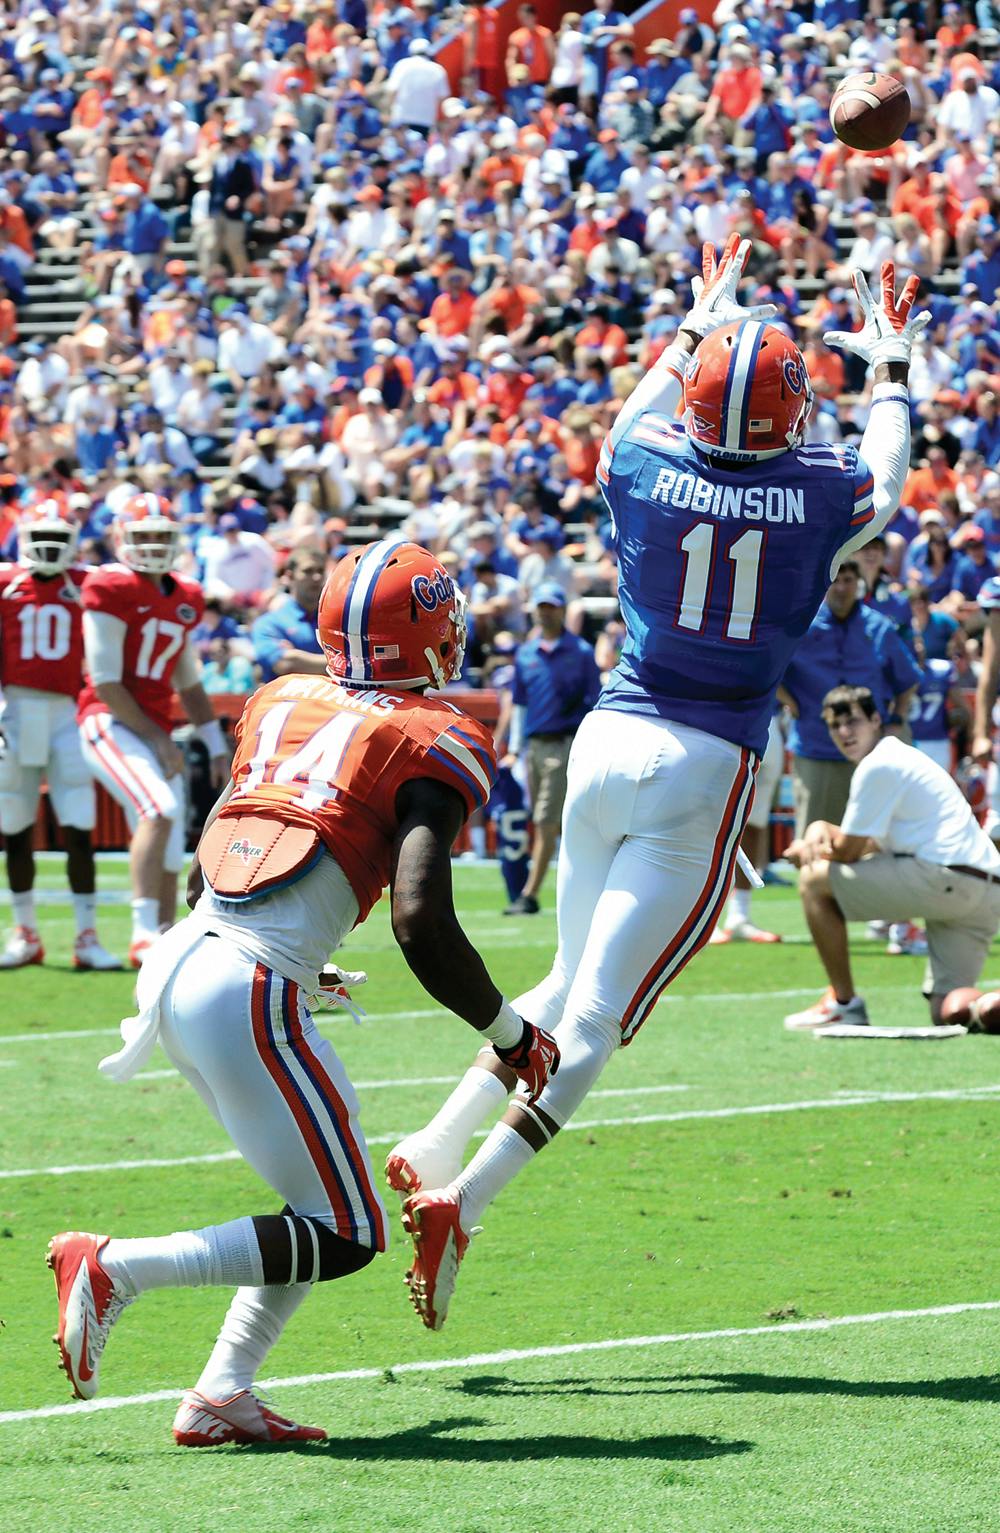 <p align="justify">Wide receiver Demarcus Robinson catches a pass at the Orange and Blue Debut in Ben Hill Griffin Stadium on April 6, 2013.</p>